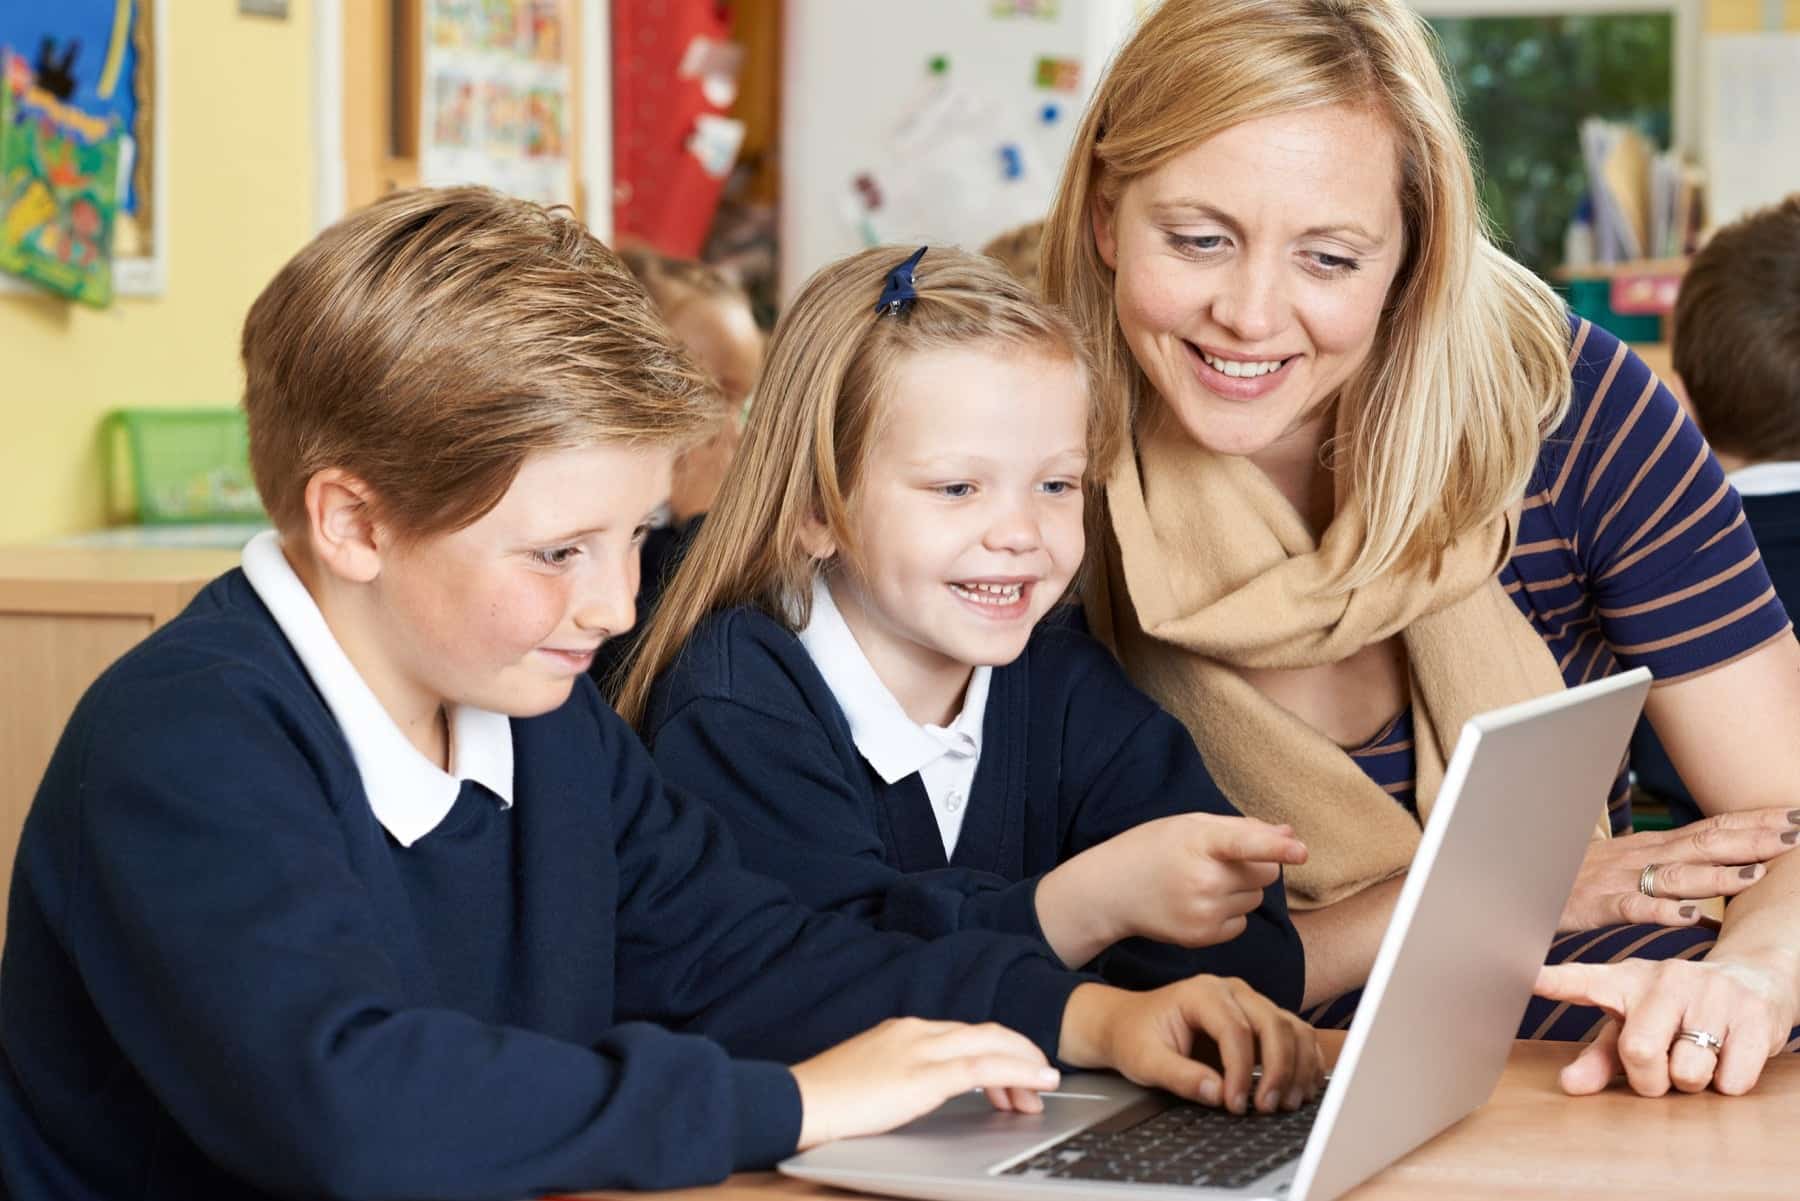 Two children and a teacher using laptops for schools, smiling.